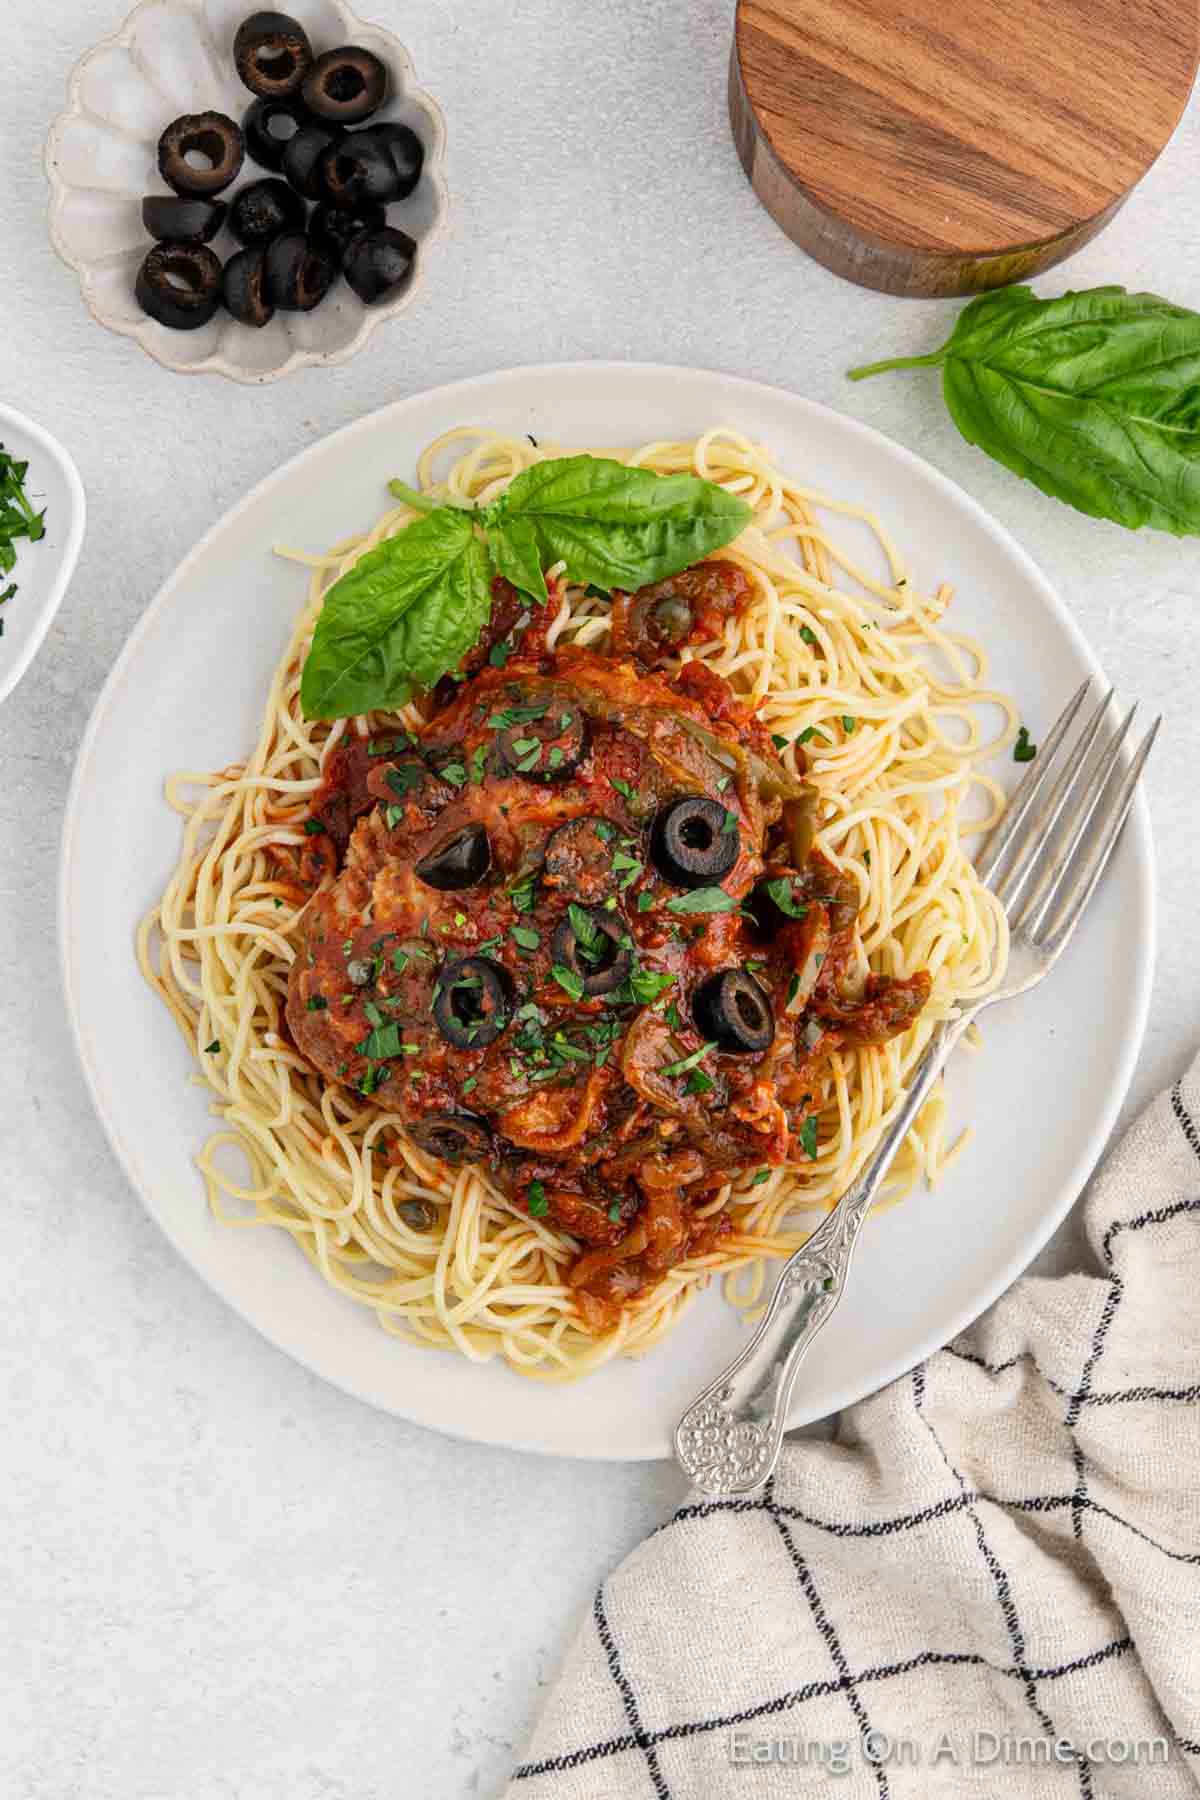 Chicken cacciatore on a plate with spaghetti noodles